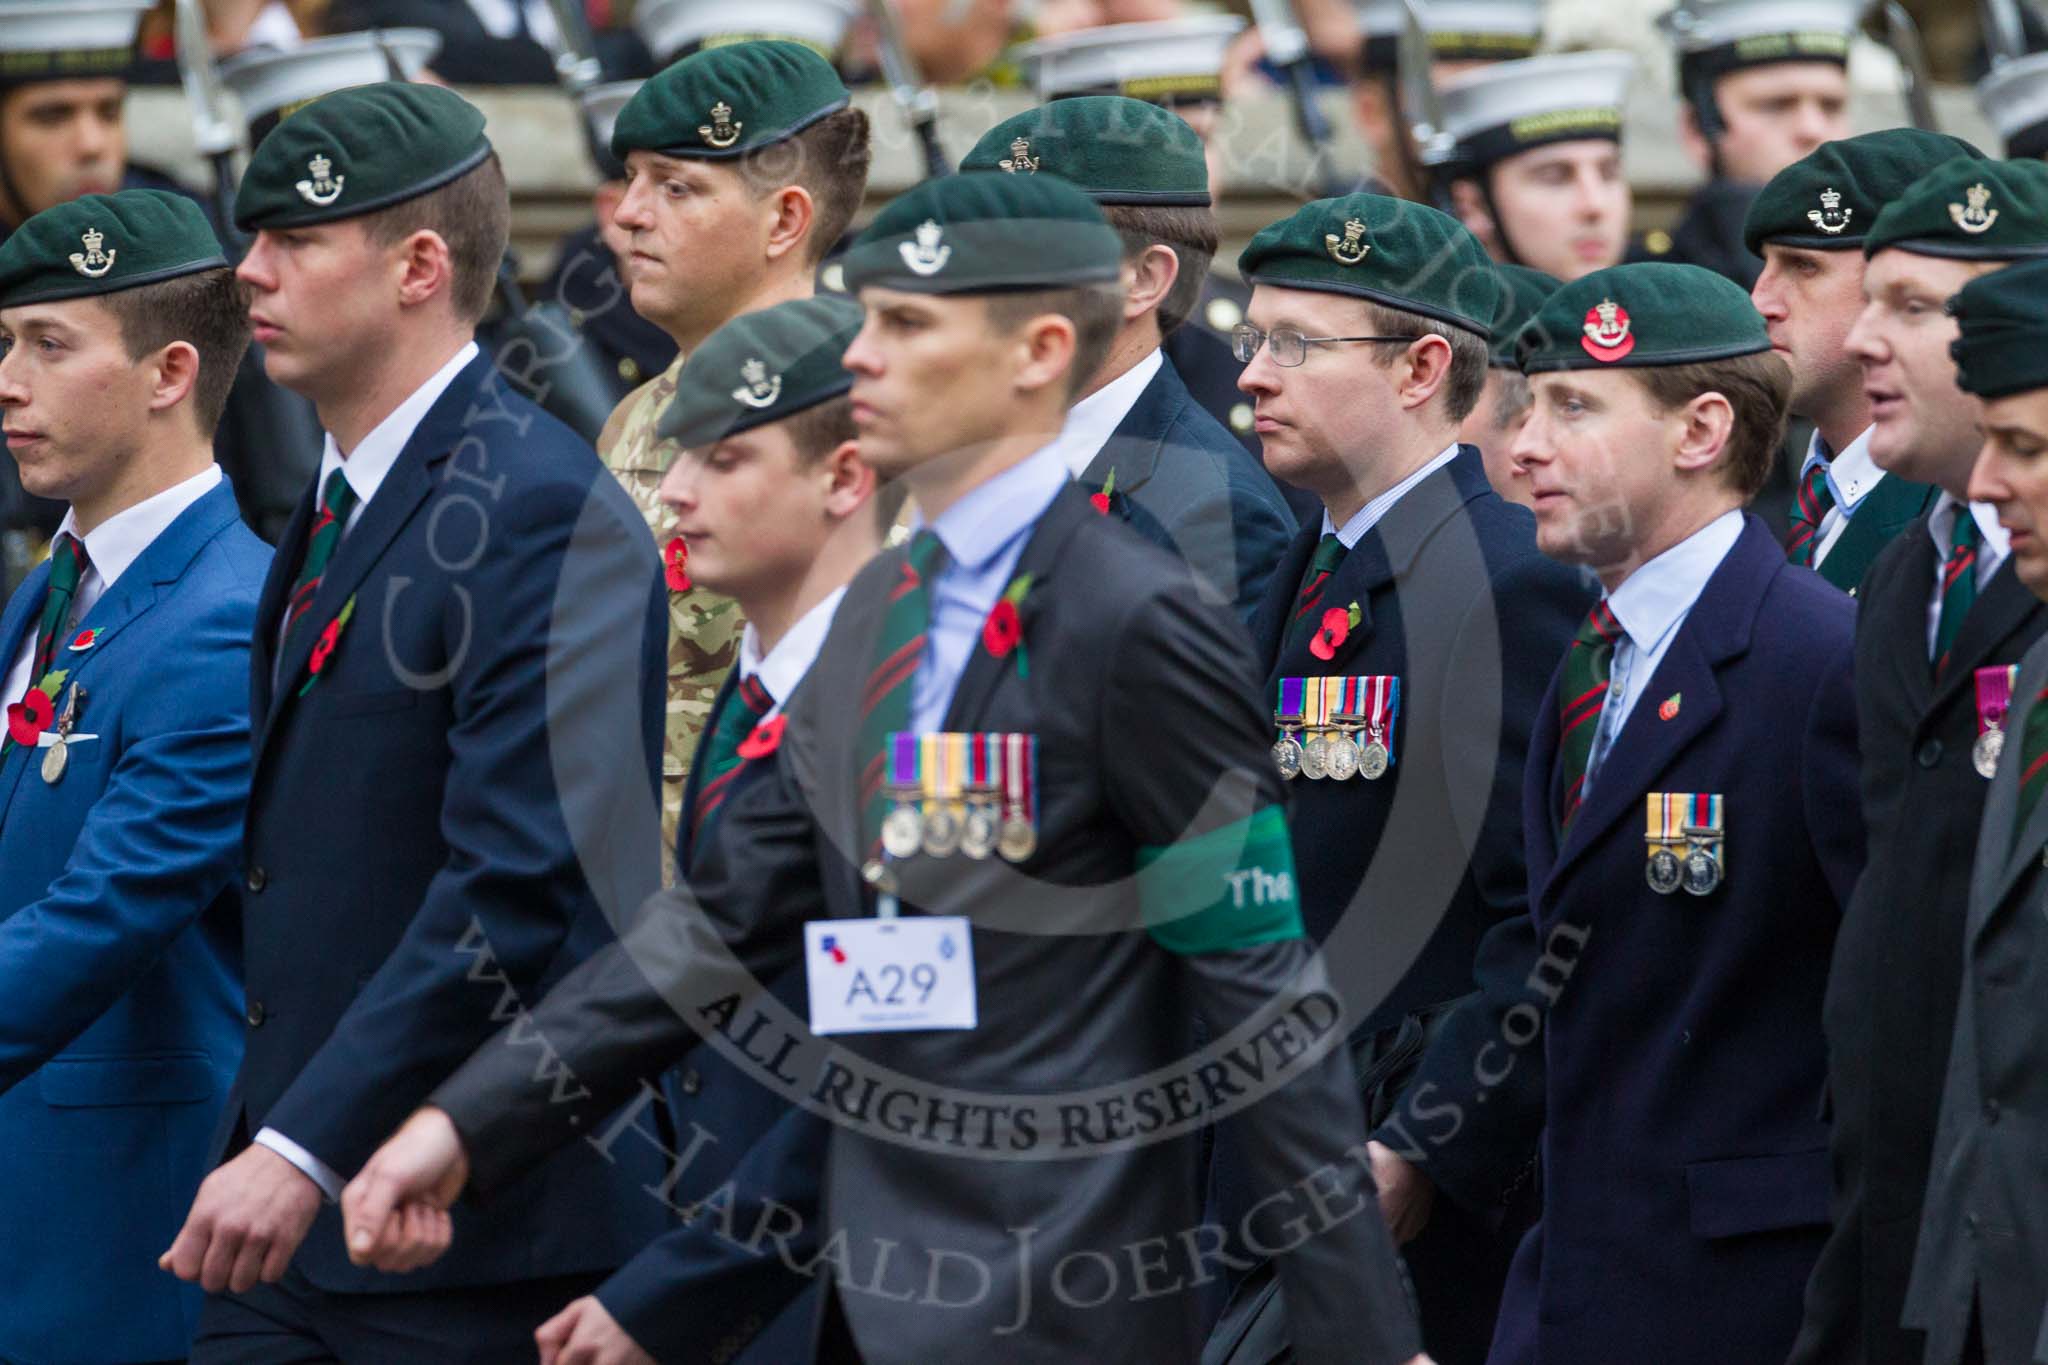 Remembrance Sunday at the Cenotaph 2015: Group A29, Rifles Regimental Association.
Cenotaph, Whitehall, London SW1,
London,
Greater London,
United Kingdom,
on 08 November 2015 at 12:13, image #1387